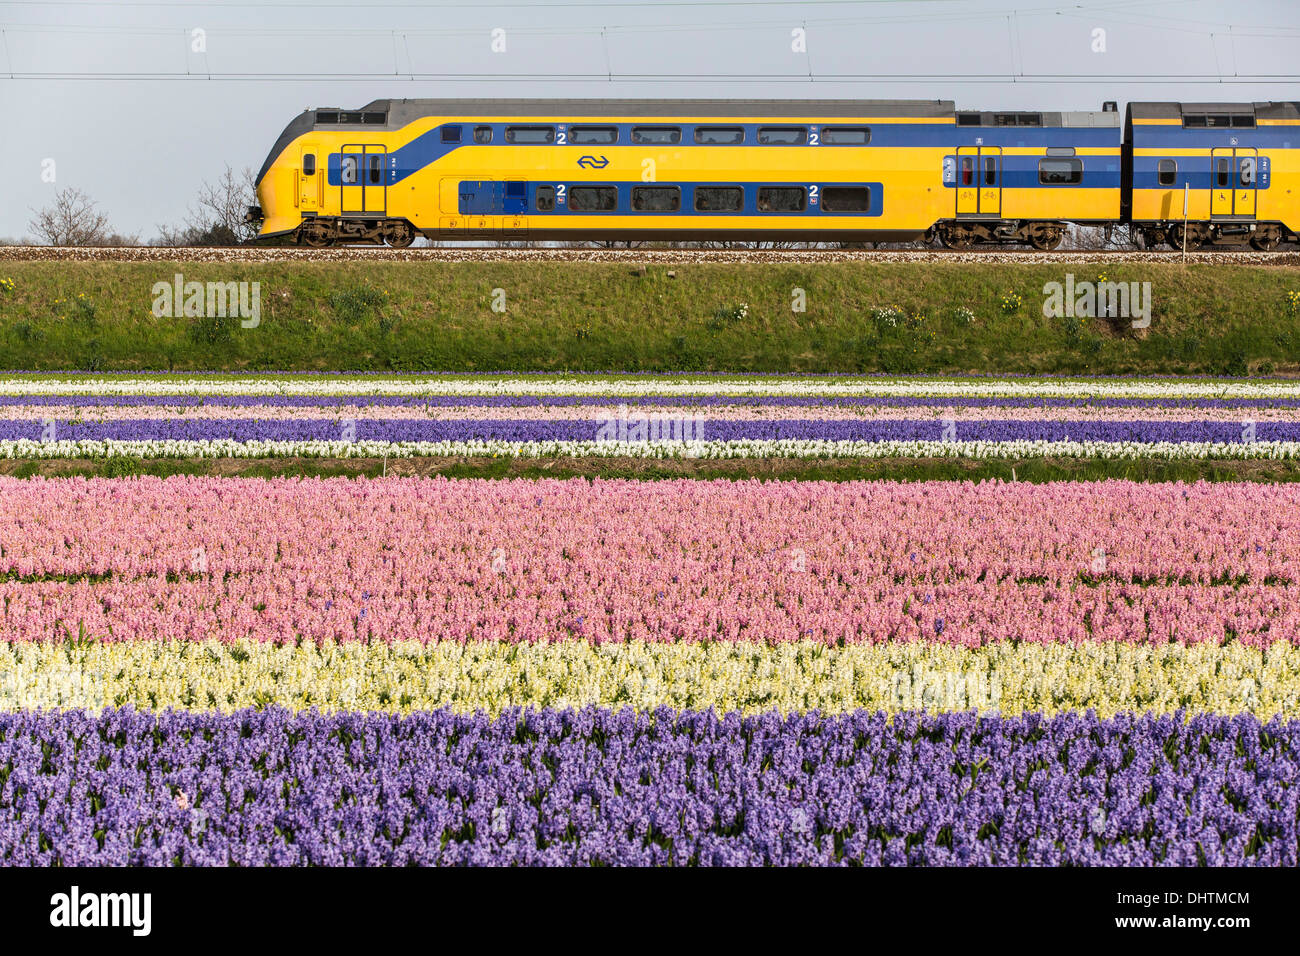 Netherlands, Vogelenzang, Flowering Hyacinths. Train passing by Stock Photo